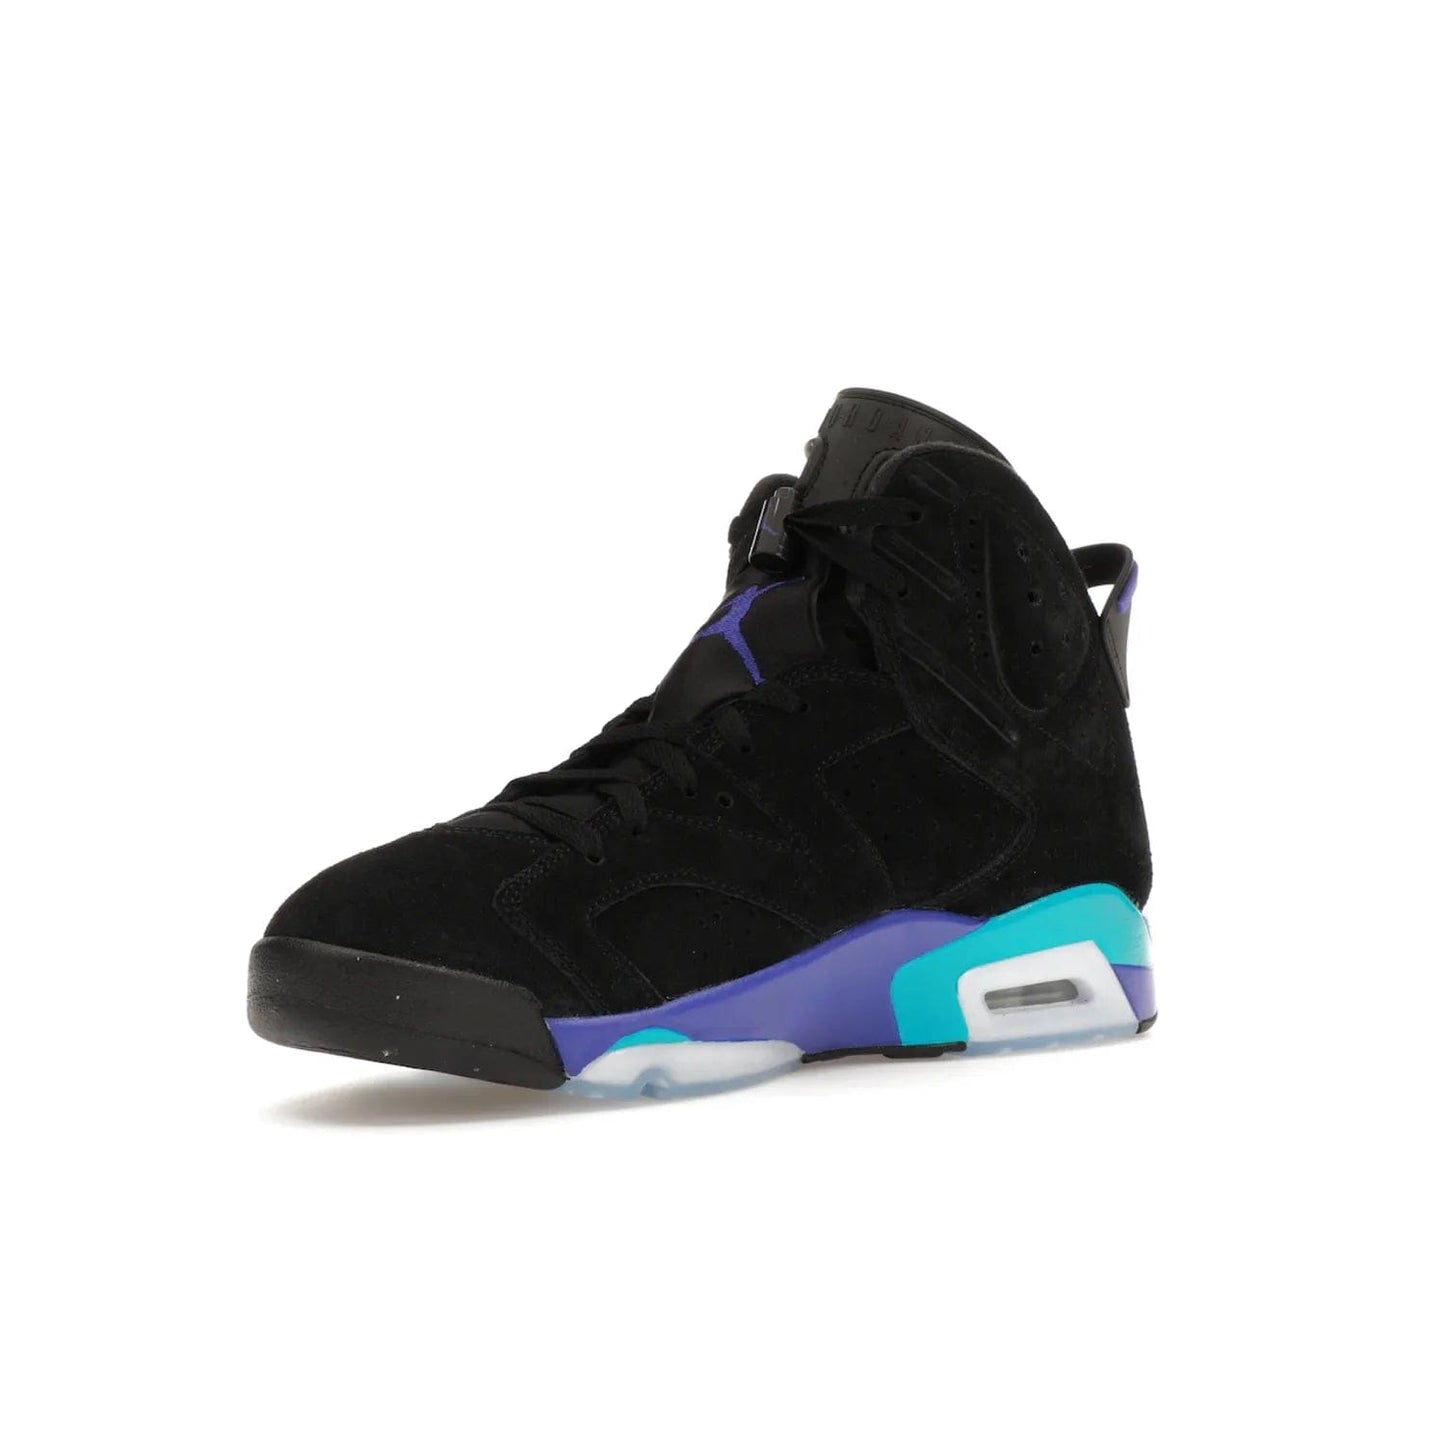 Jordan 6 Retro Aqua - Image 15 - Only at www.BallersClubKickz.com - Feel the classic Jordan 6 Retro Aqua paired with modern style. Black, Bright Concord, and Aquatone hues are crafted with a supple suede and rubberized heel tab. This standout sneaker adds signature Jordan elements at $200. Elevate your style with the Jordan 6 Retro Aqua.